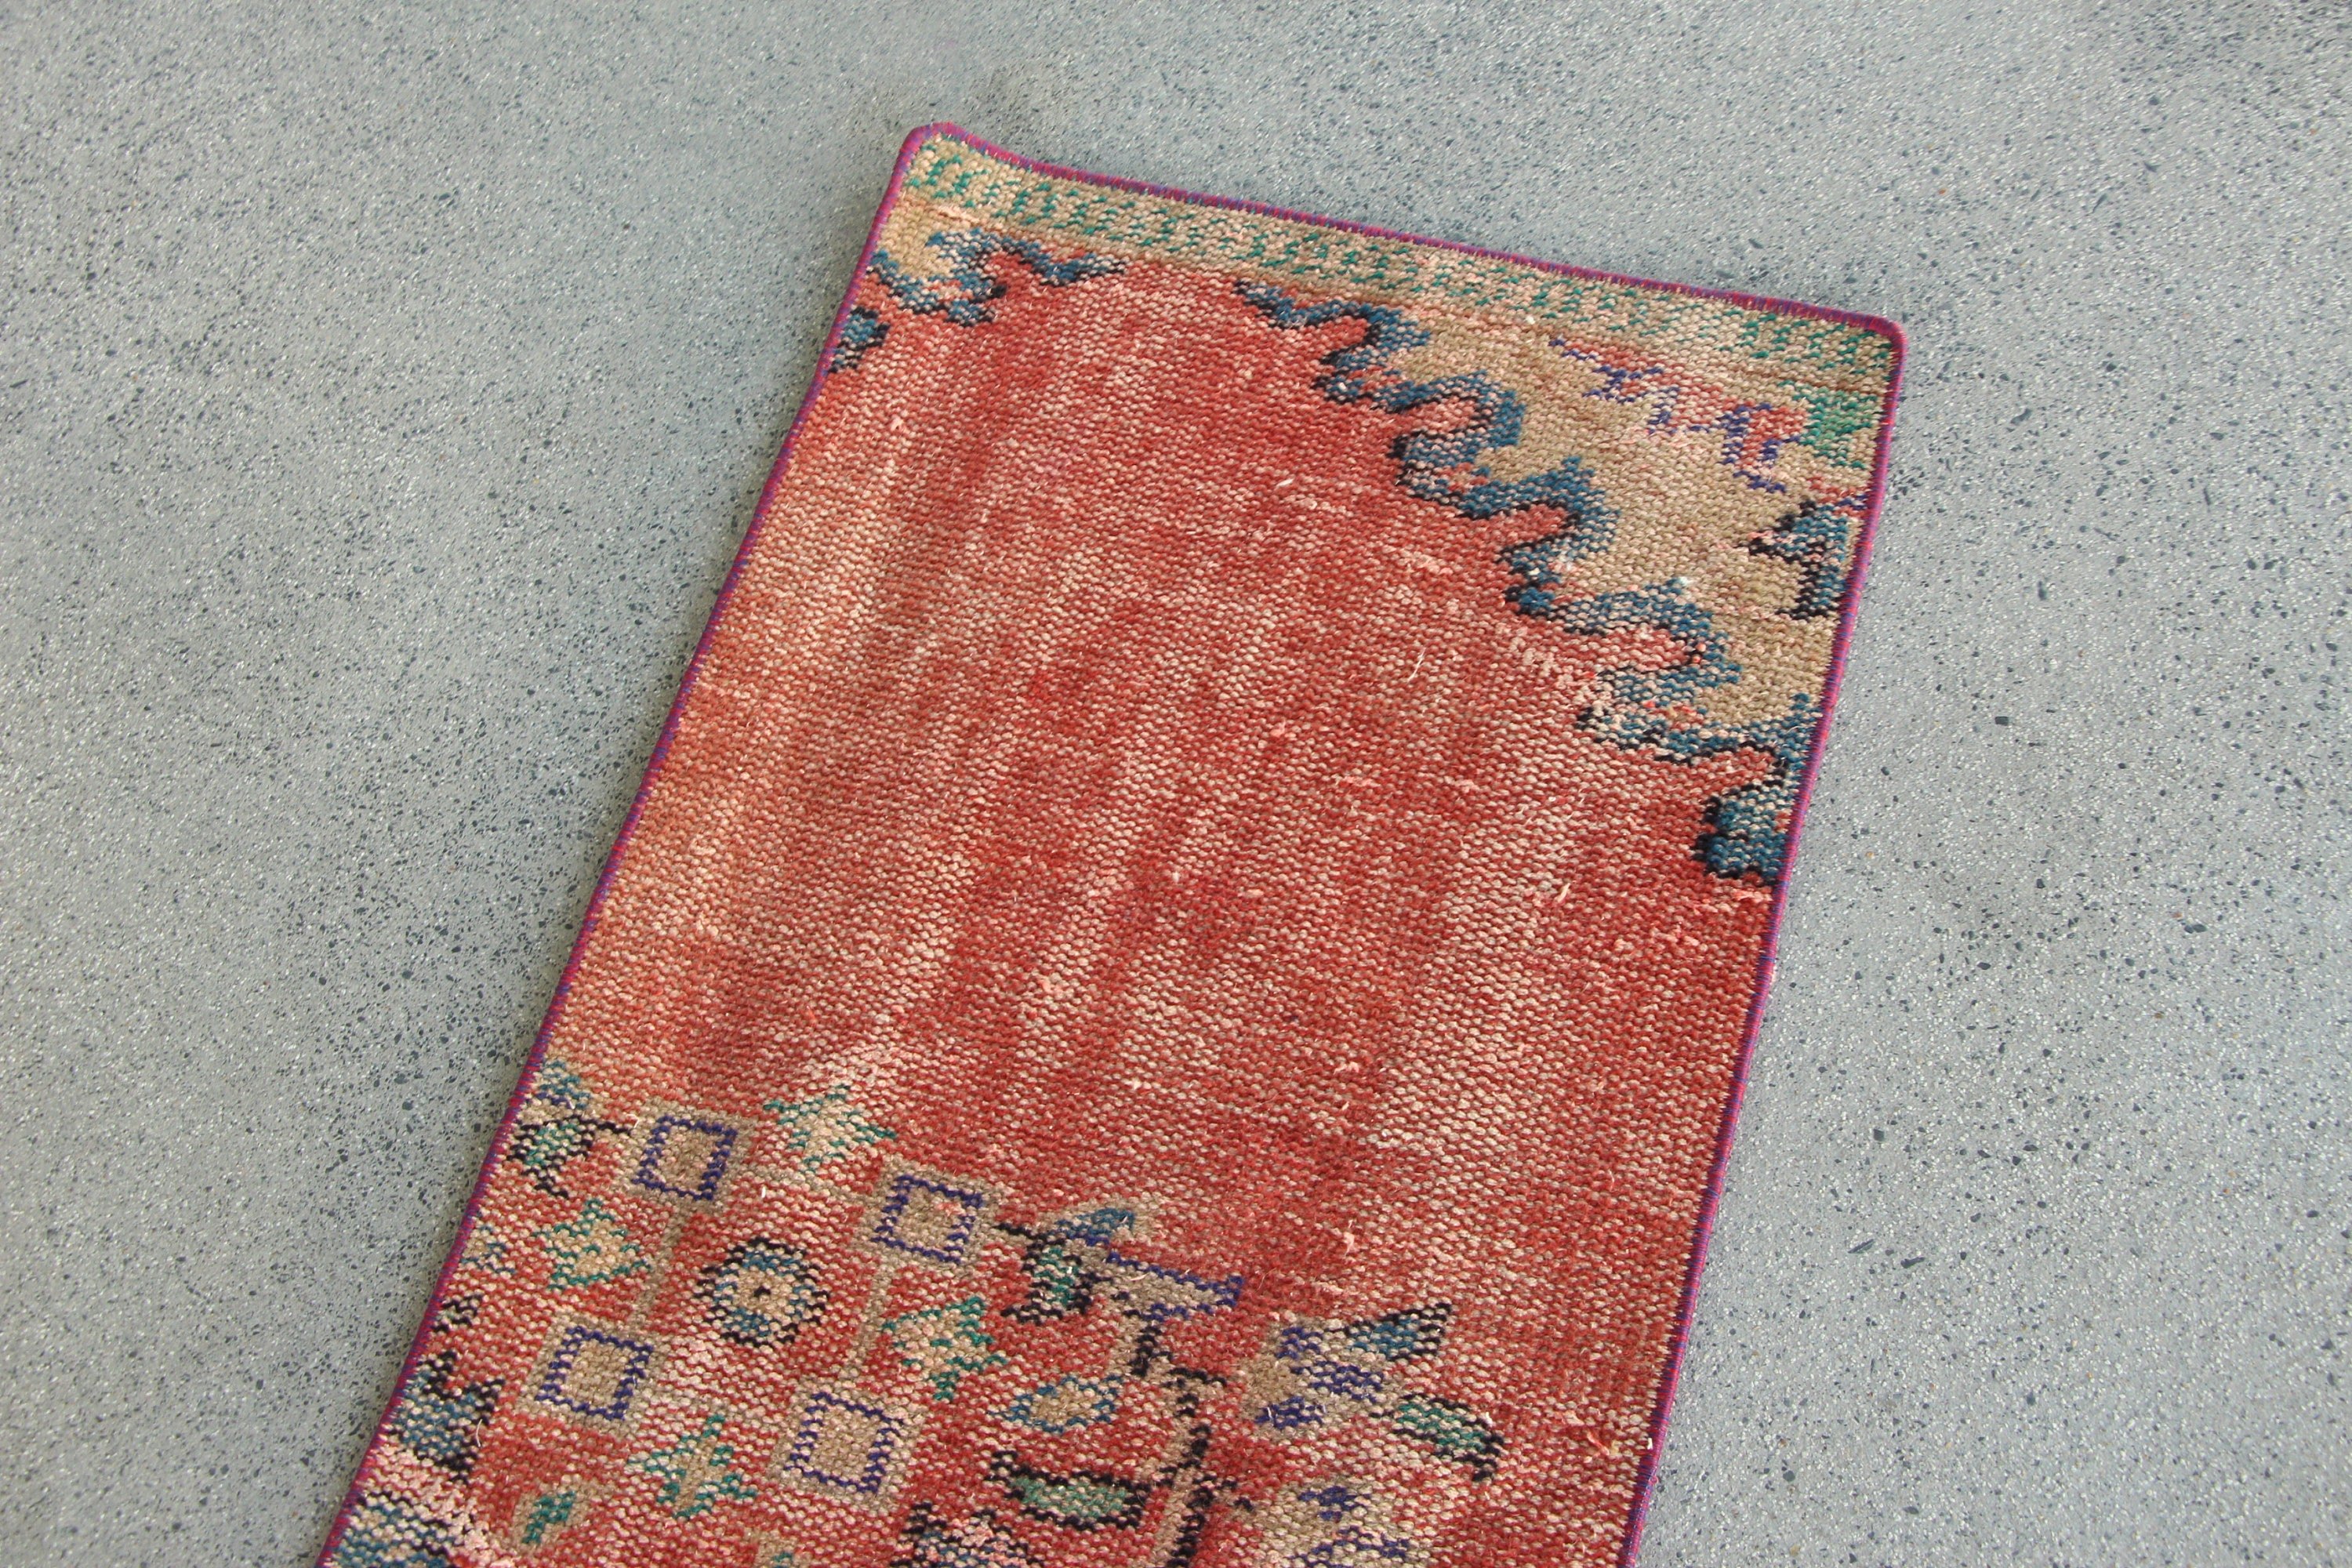 Turkish Rugs, Red Moroccan Rug, Vintage Rug, Entry Rugs, Rugs for Bedroom, 1.6x2.8 ft Small Rugs, Anatolian Rug, Kitchen Rug